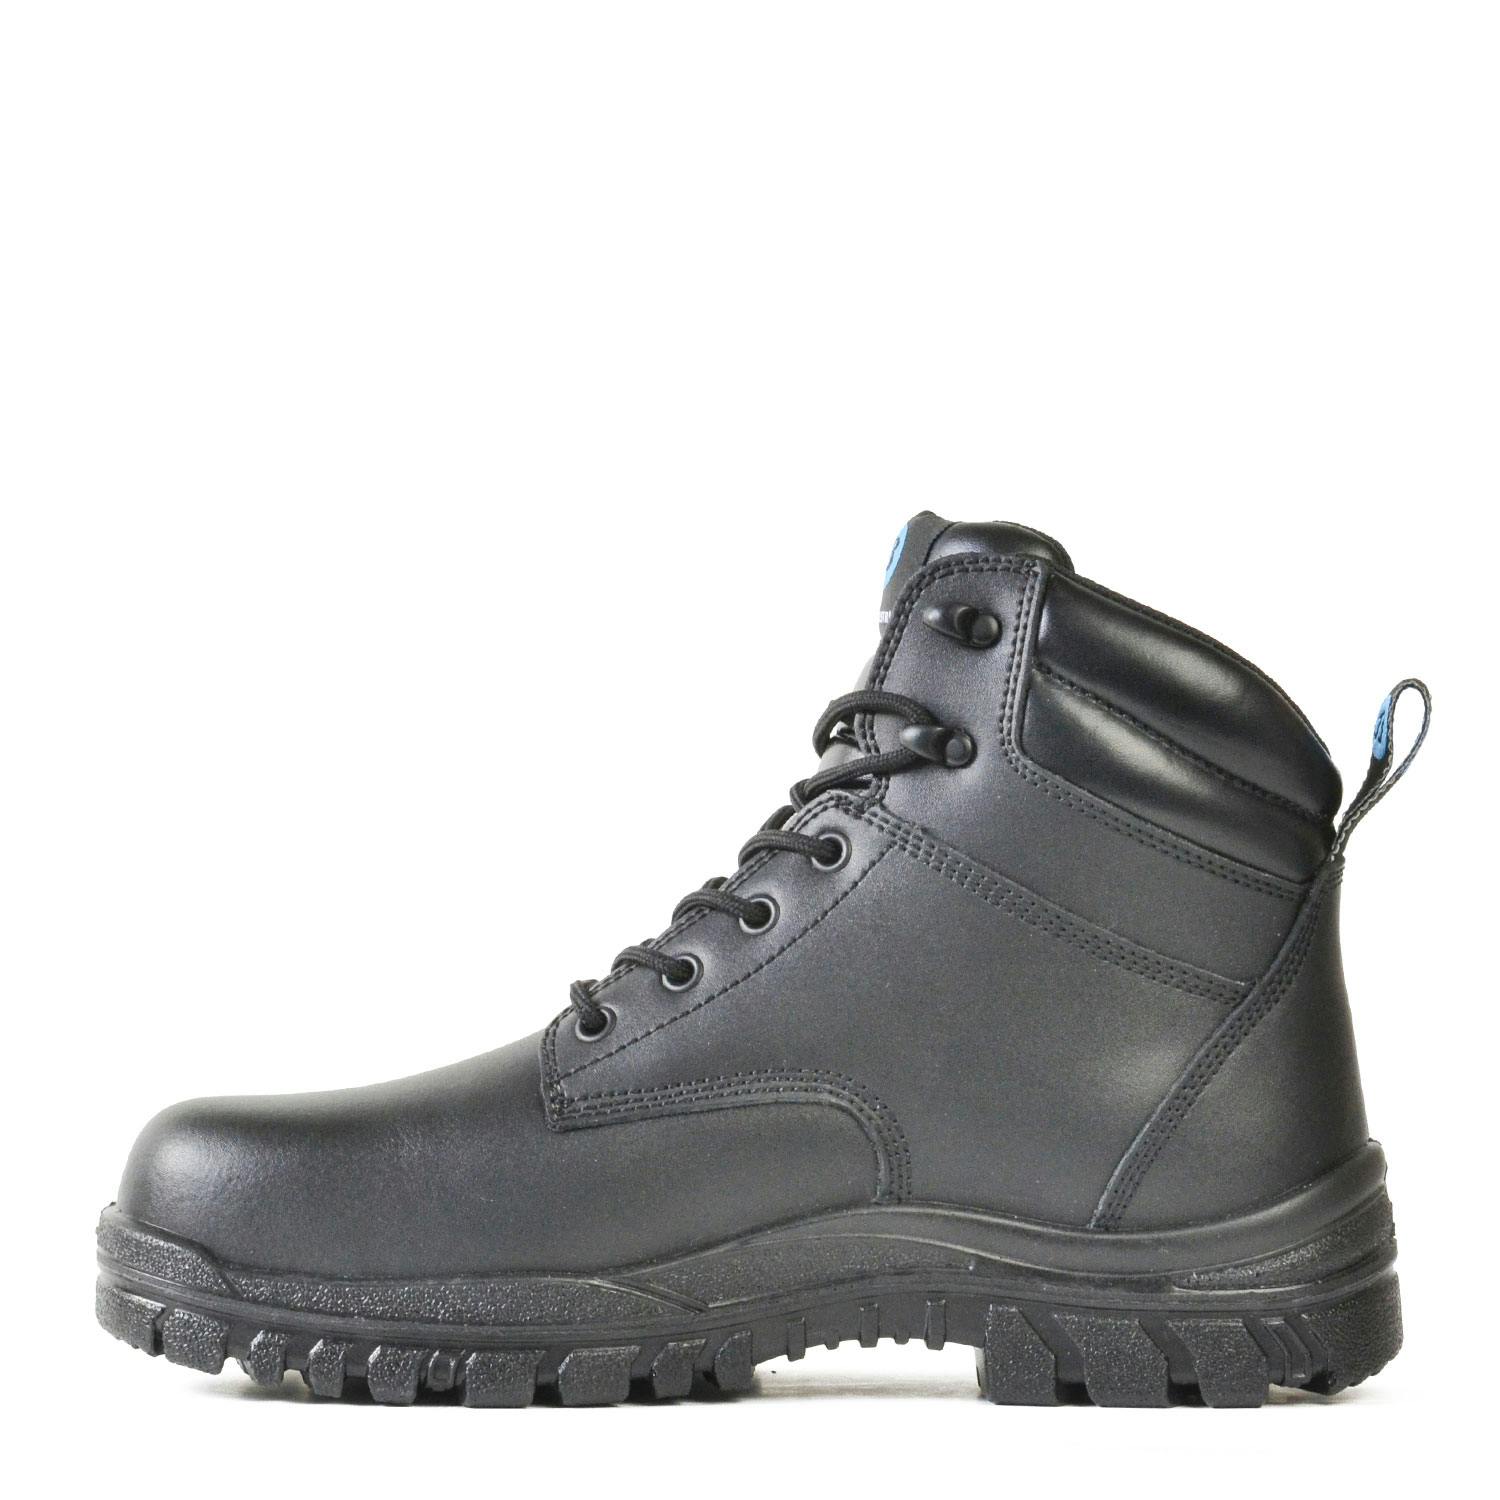 Bata Industrials Saturn - Black Leather Lace Up Safety Boot (Naturals)_3